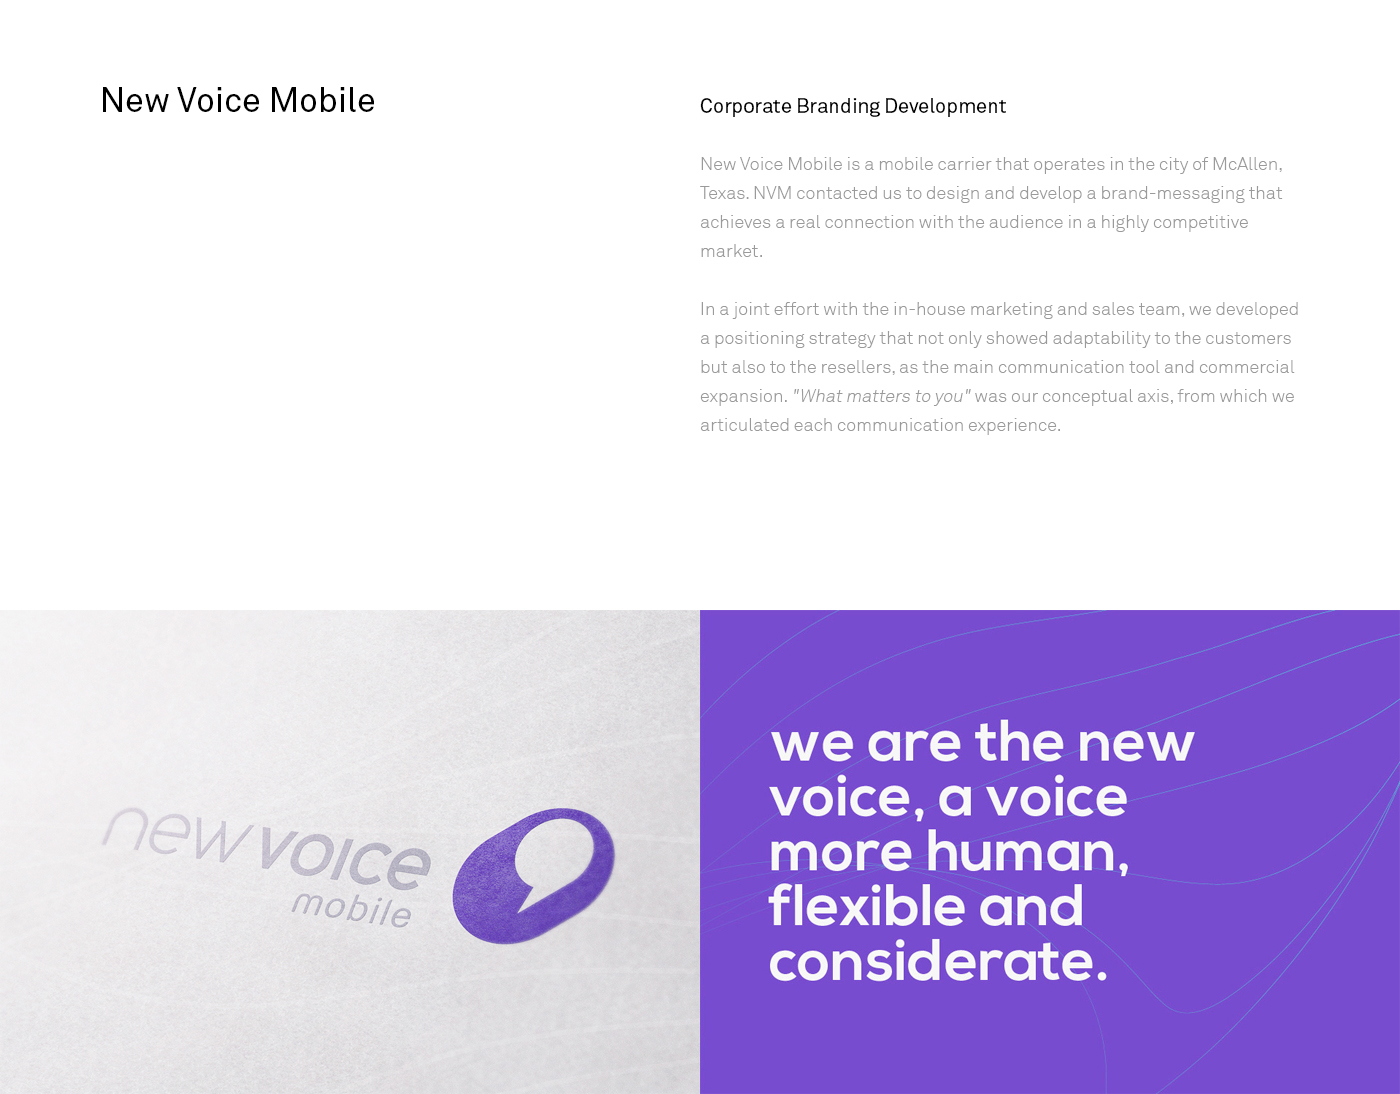 mobile phone Technology simple clean Logotype modern new voice mobile telecommunications Celular purple strategy research